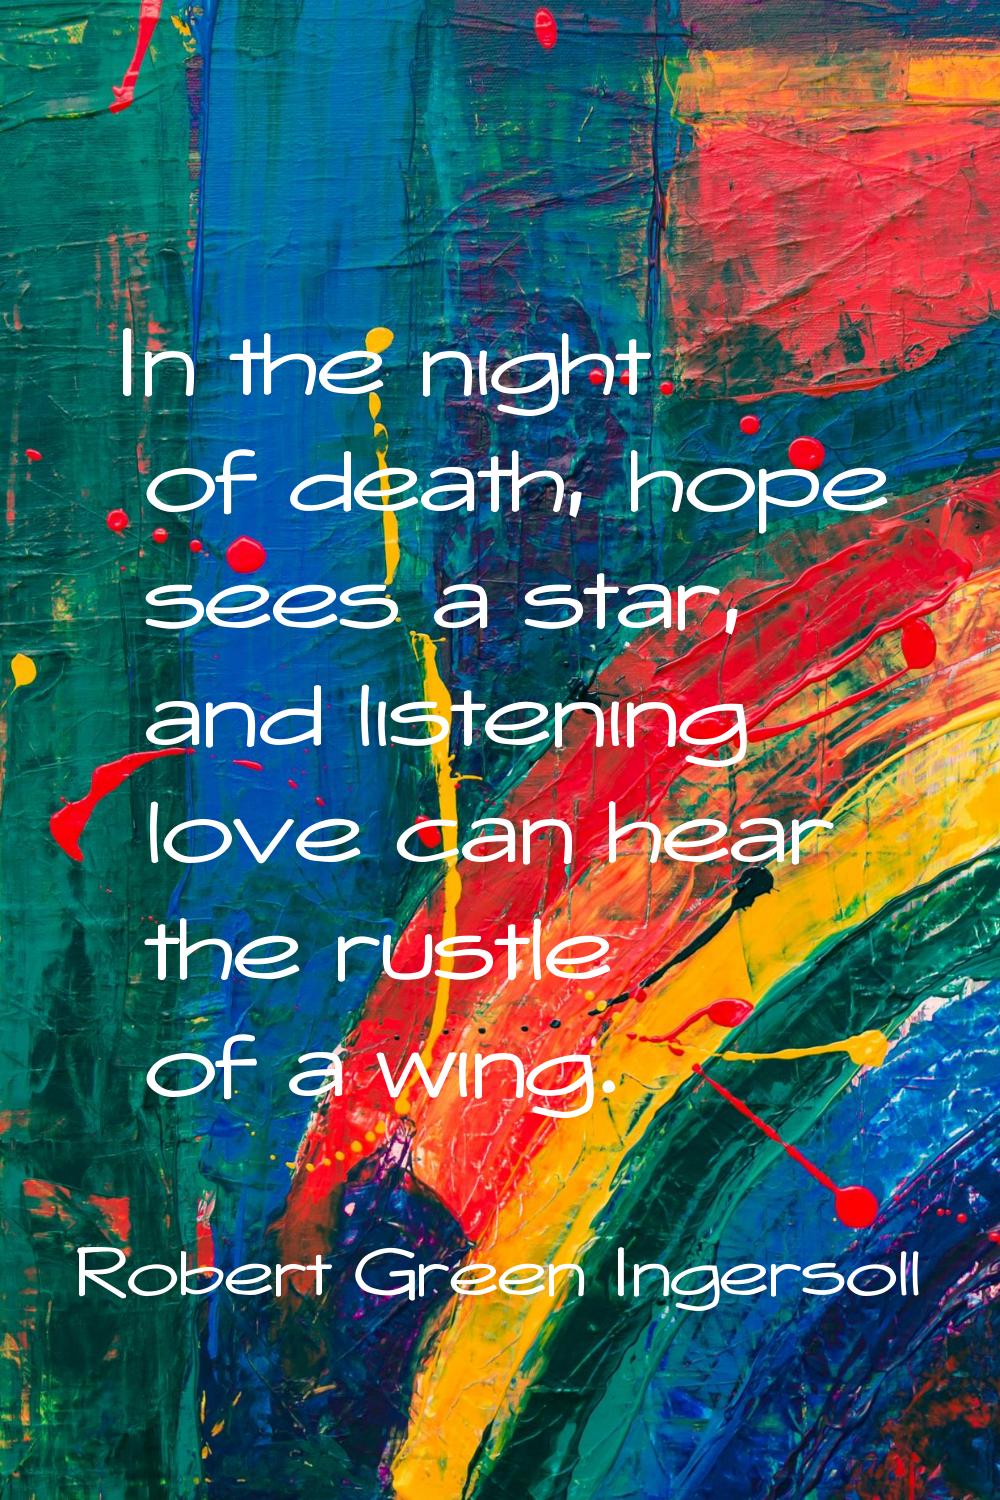 In the night of death, hope sees a star, and listening love can hear the rustle of a wing.